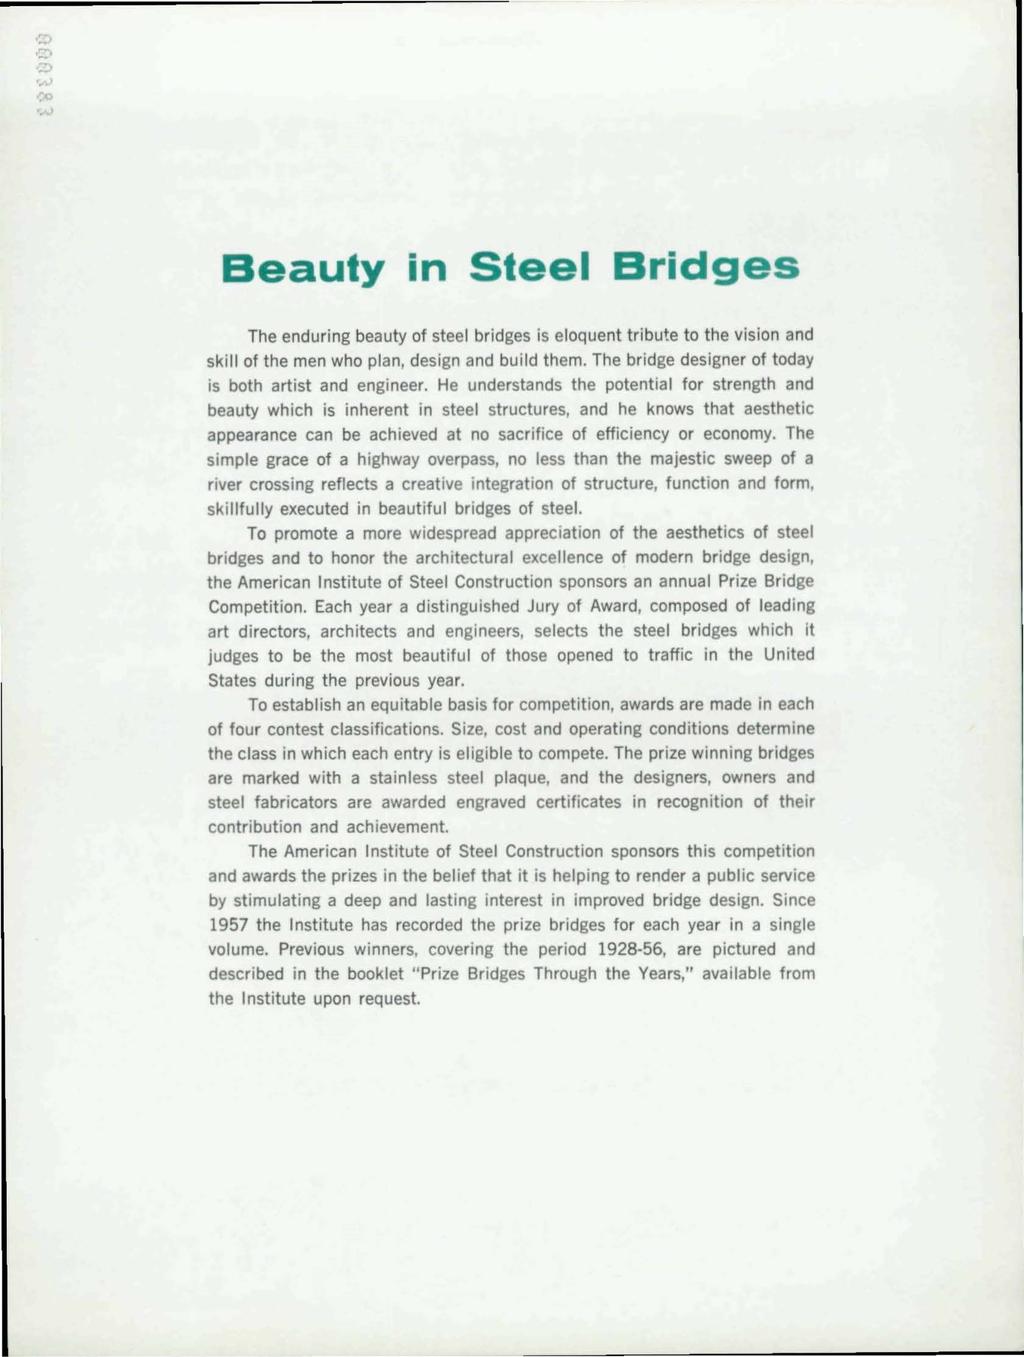 Beauty in Steel Bridges The enduring beauty of steel bridges is eloquent tribute to the vision and skill of the men who plan, design and build them.